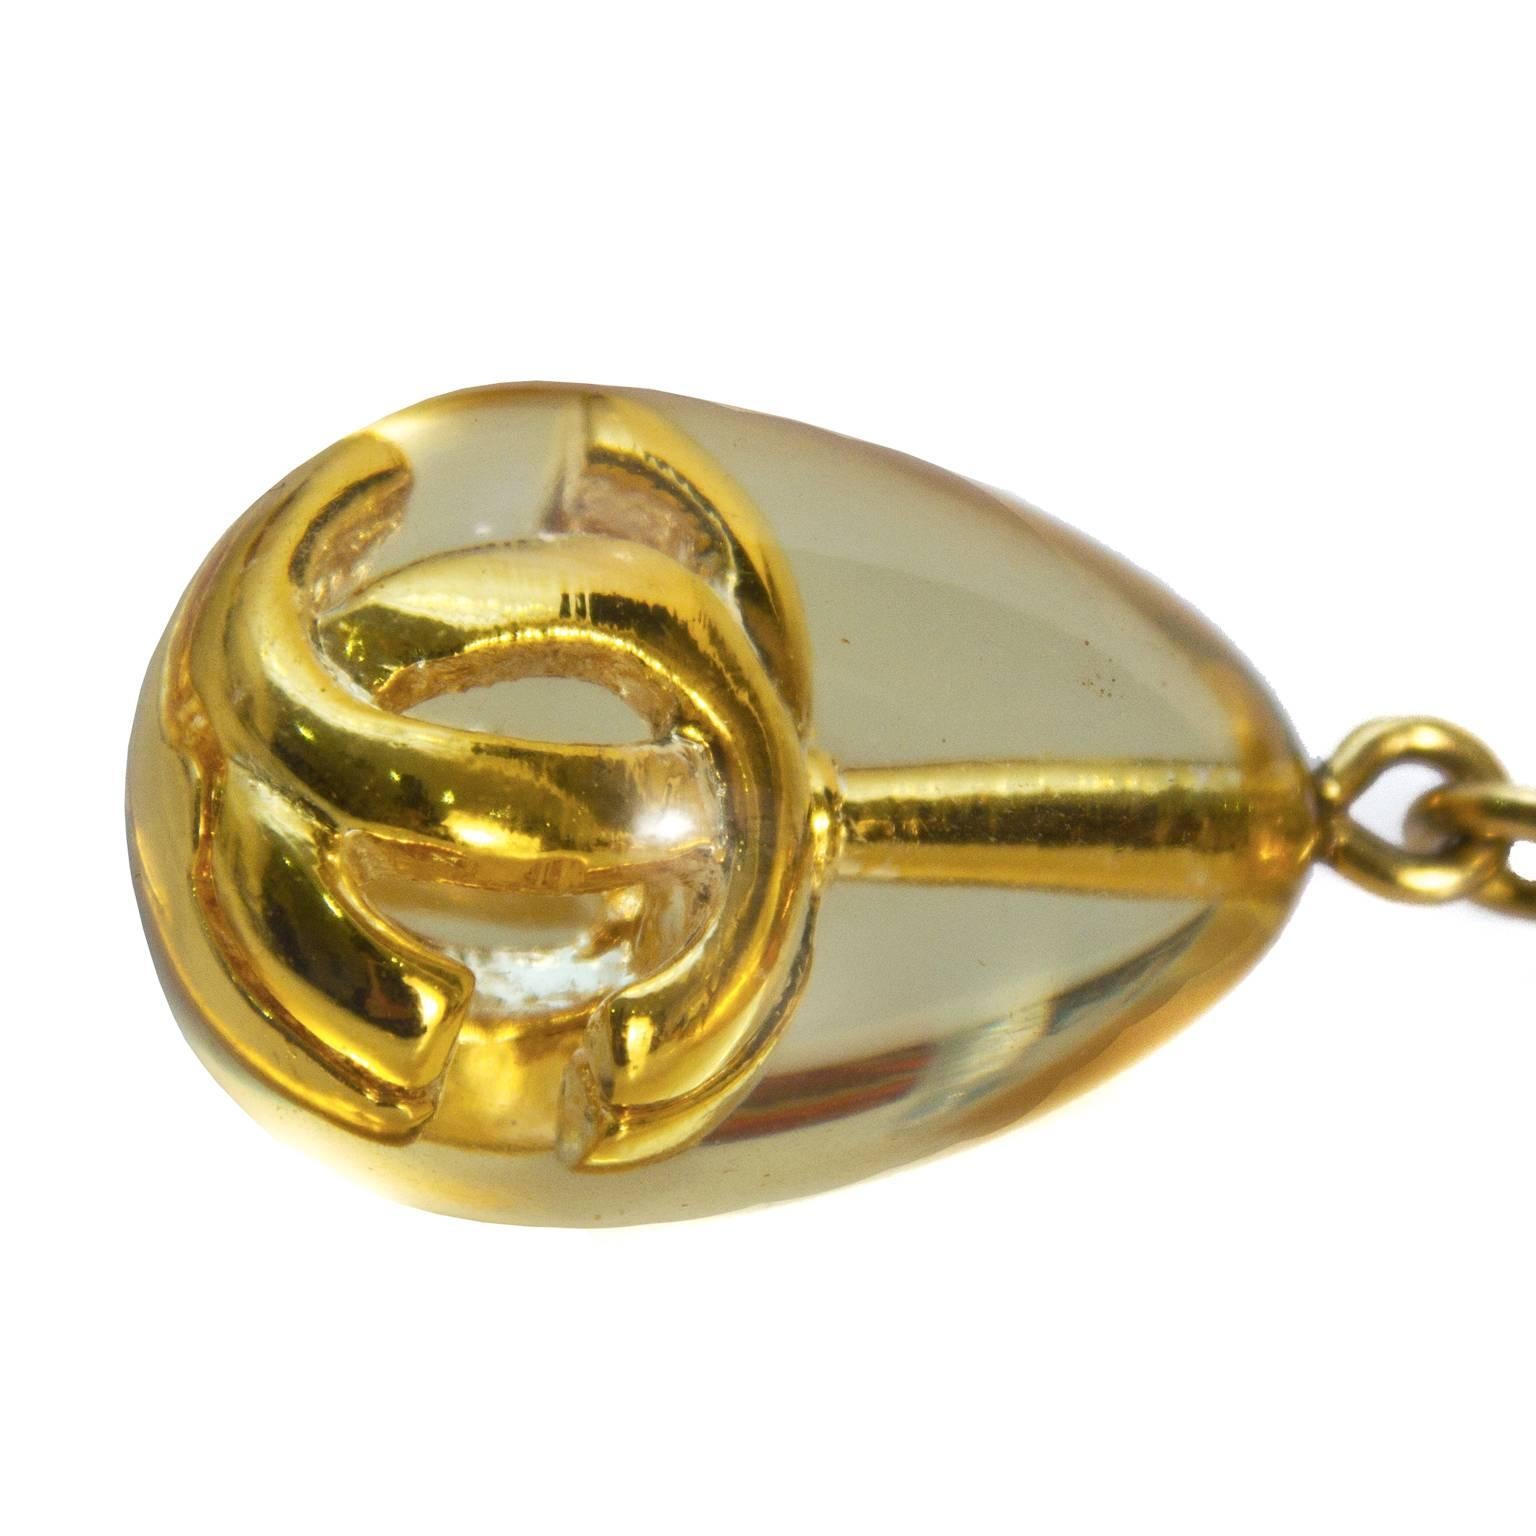 This stunning gold plate Chanel necklace is the perfect way to add some drama to any outfit. Features long chain, with a clear plexi teardrop shaped pendant with a gold CC inside of it. Spring ring clasp. Excellent vintage condition. 

Drop 17